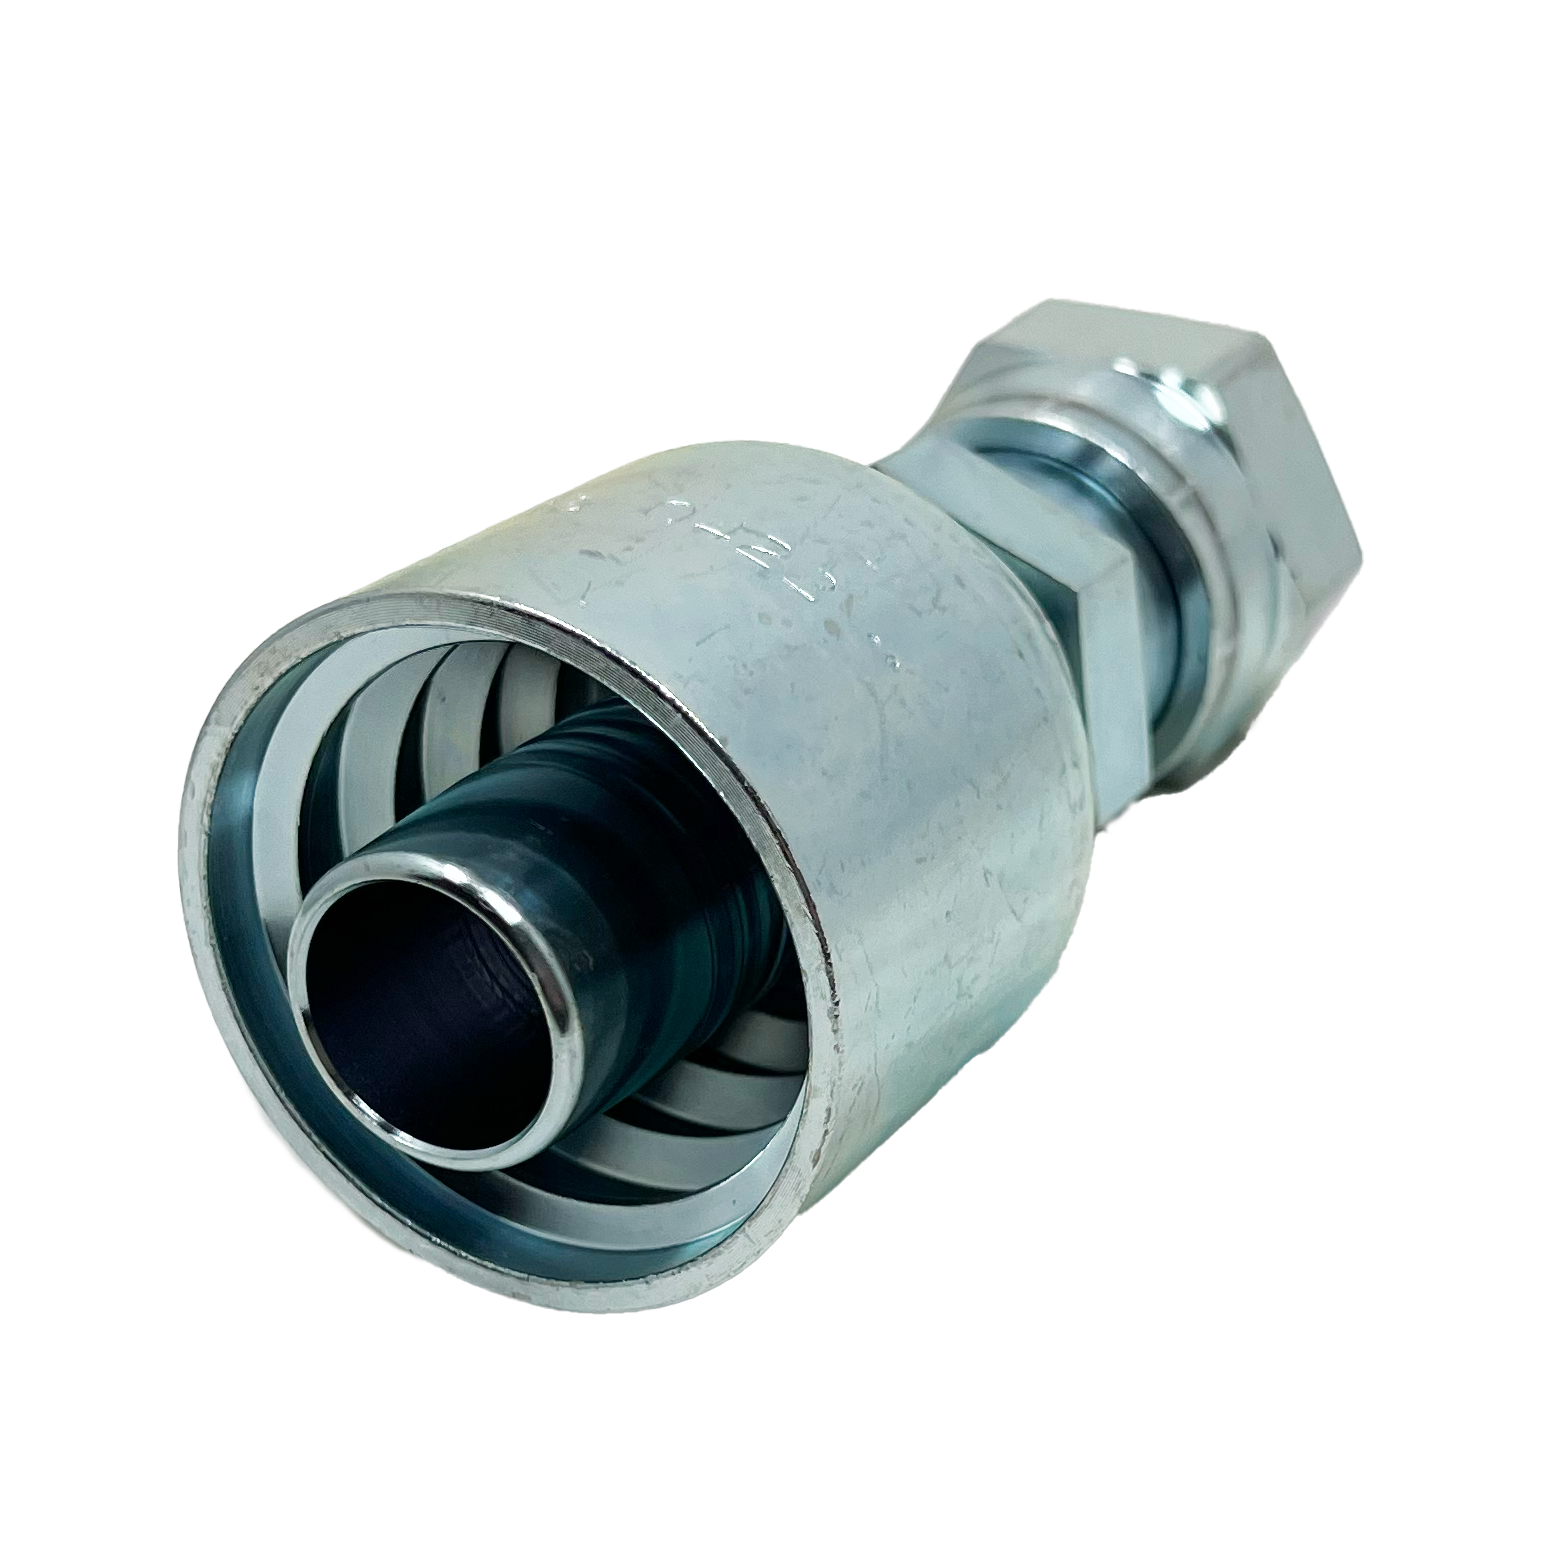 B2-OFFX-1616: Continental Hose Fitting, 1" Hose ID x 1-7/16-12 Female ORFS, Straight Swivel Connection